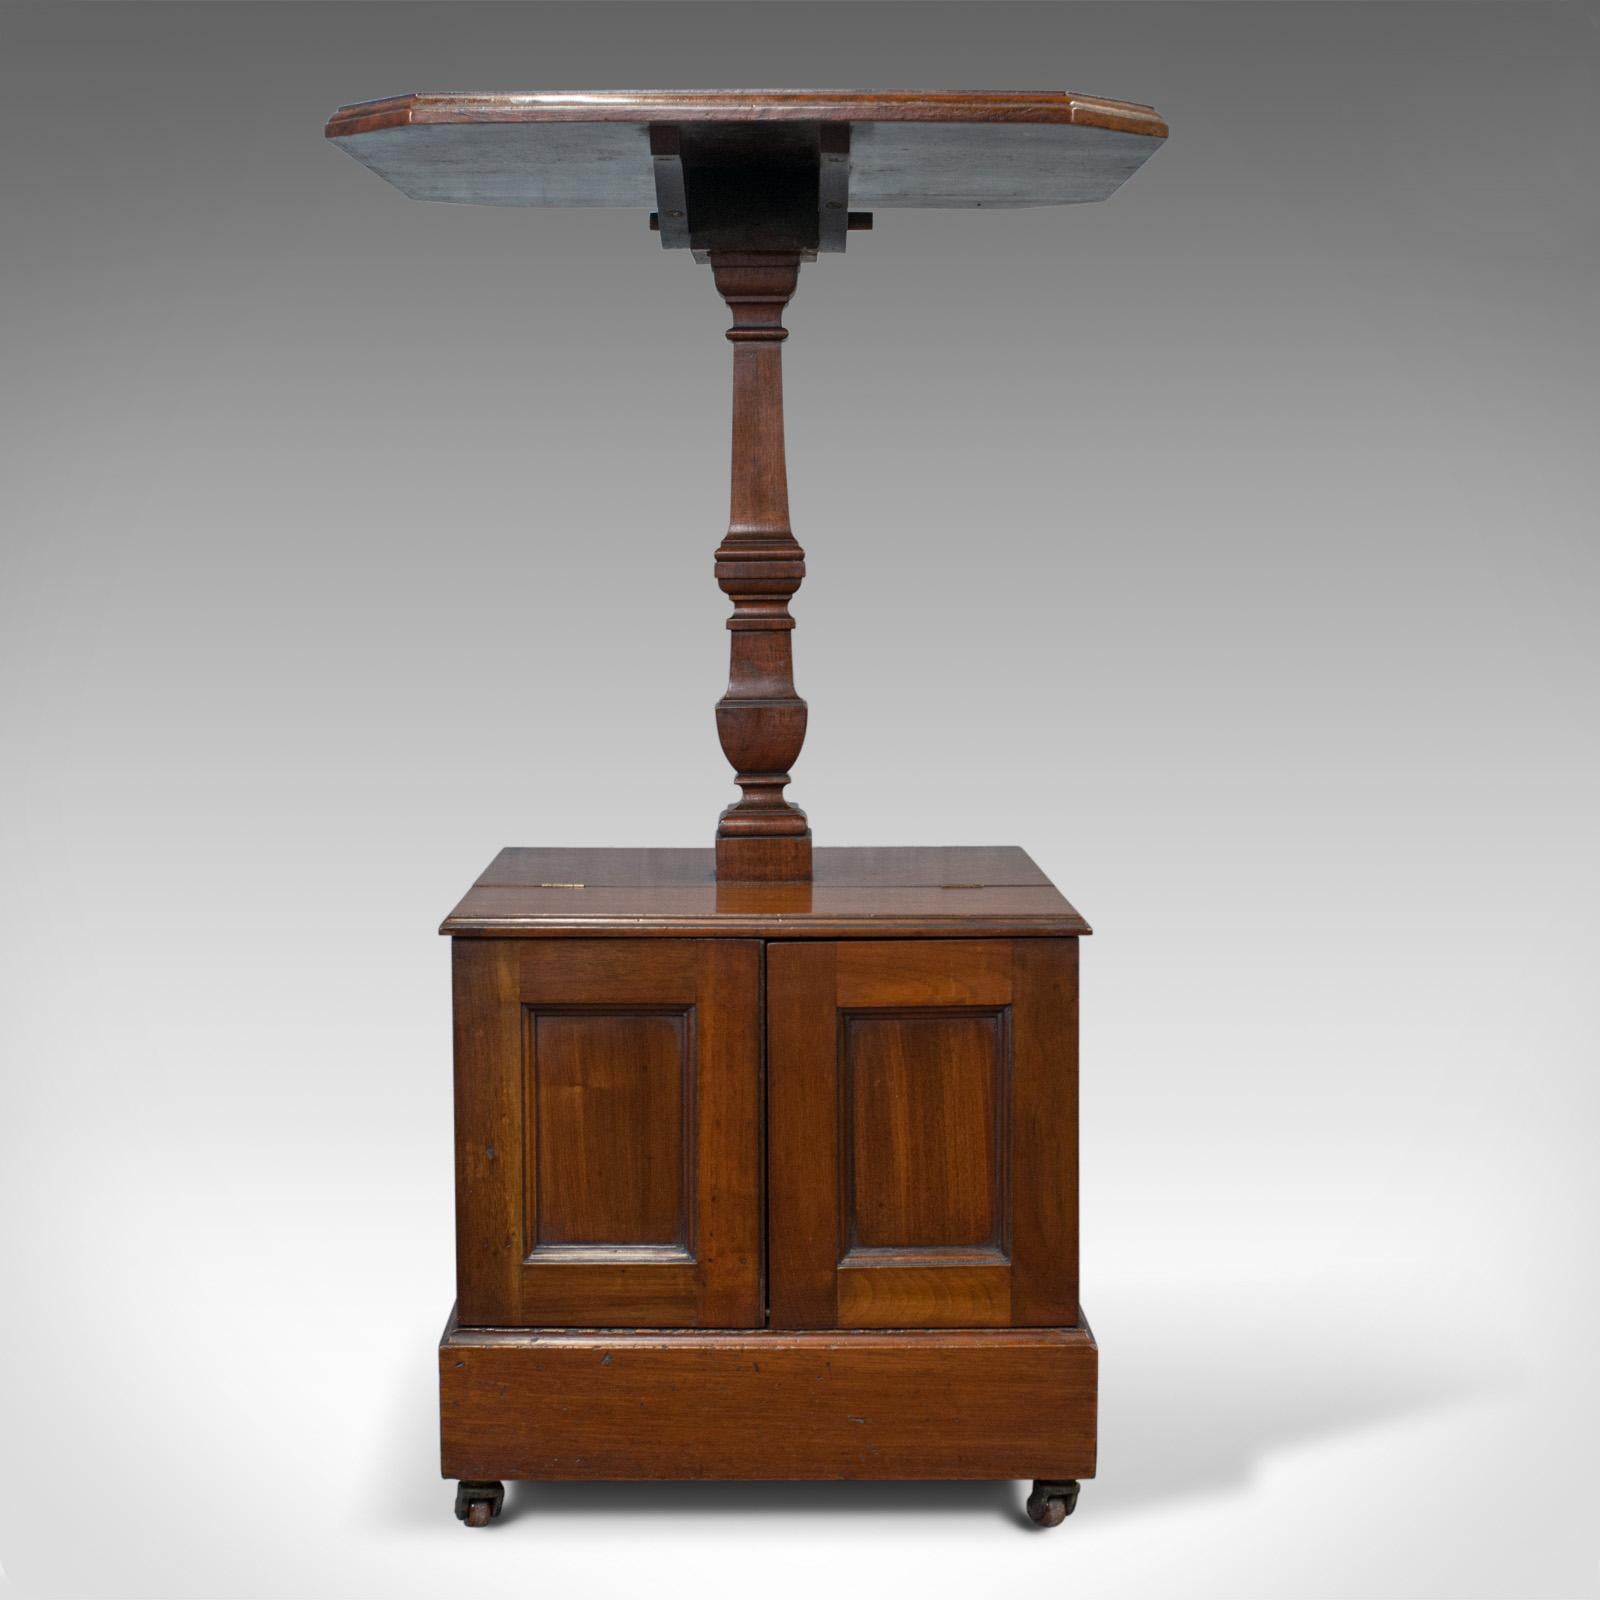 This is an antique purdonium, a til-top table and coal box. An English, Edwardian, walnut side table dating to the early 20th century, circa 1910.

A fascinating Edwardian example in very good condition
Walnut displays fine colour and grain